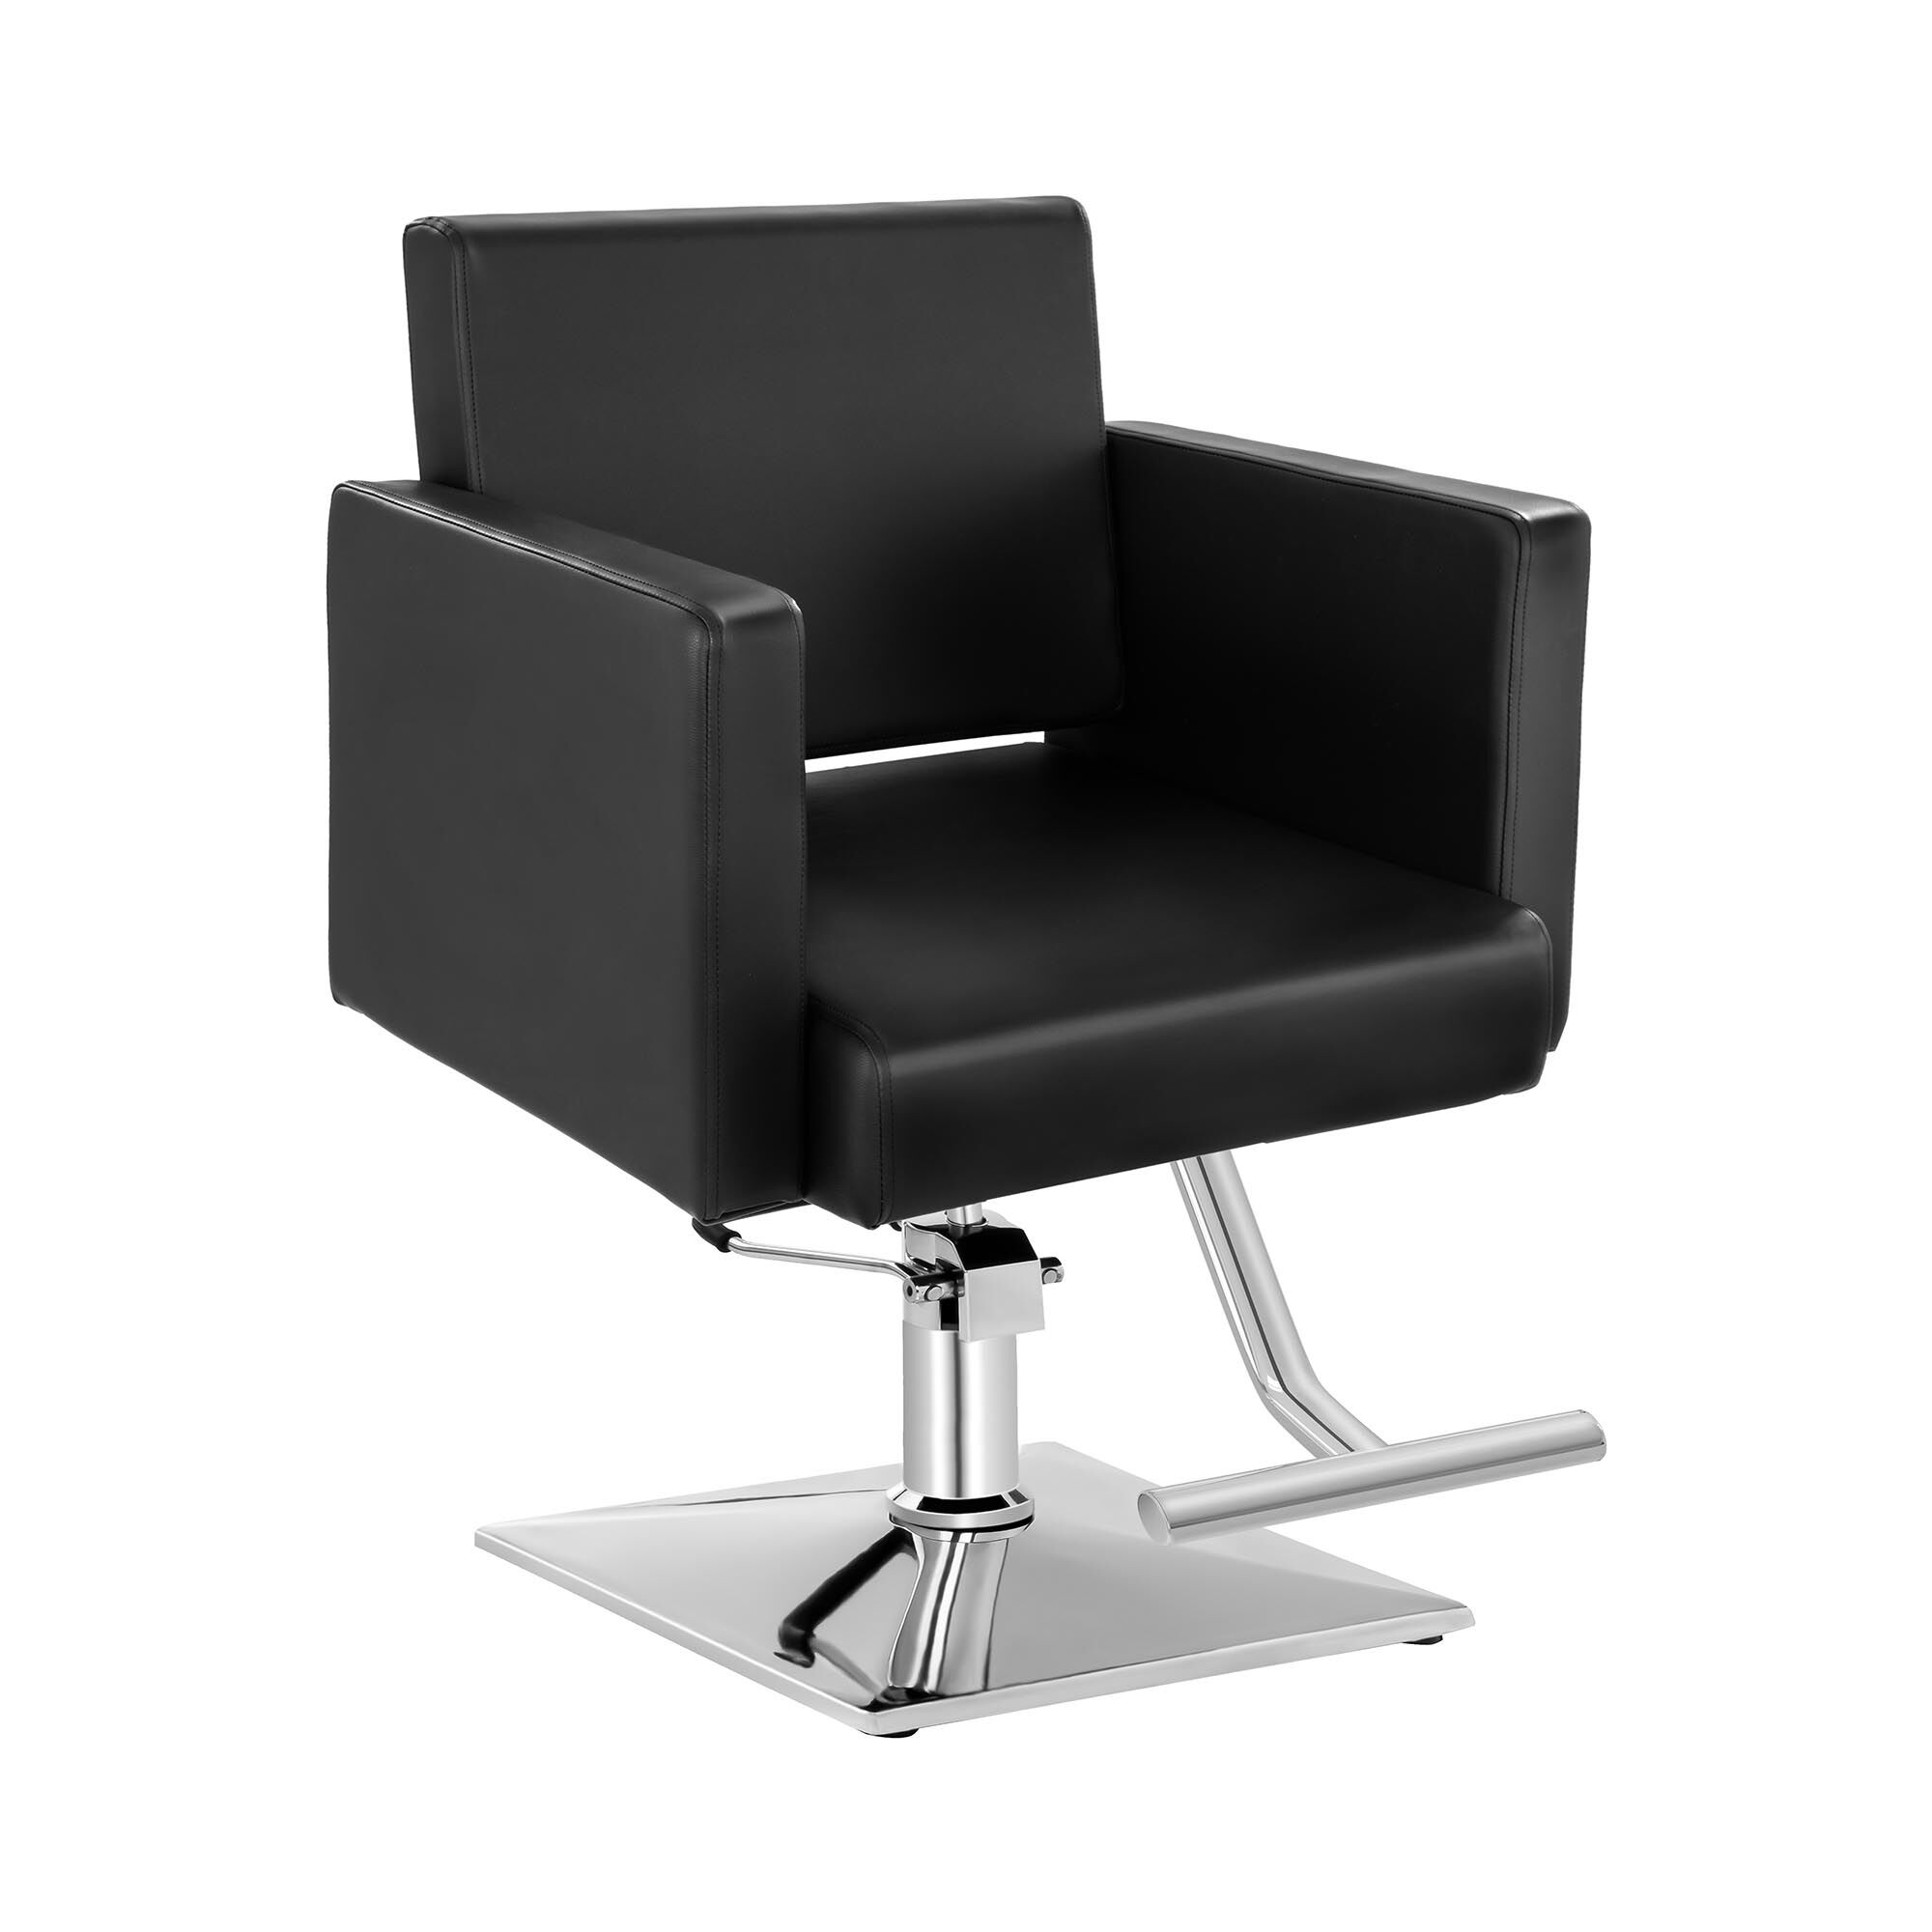 physa Barber Chair with Footrest BEDFORD BLACK